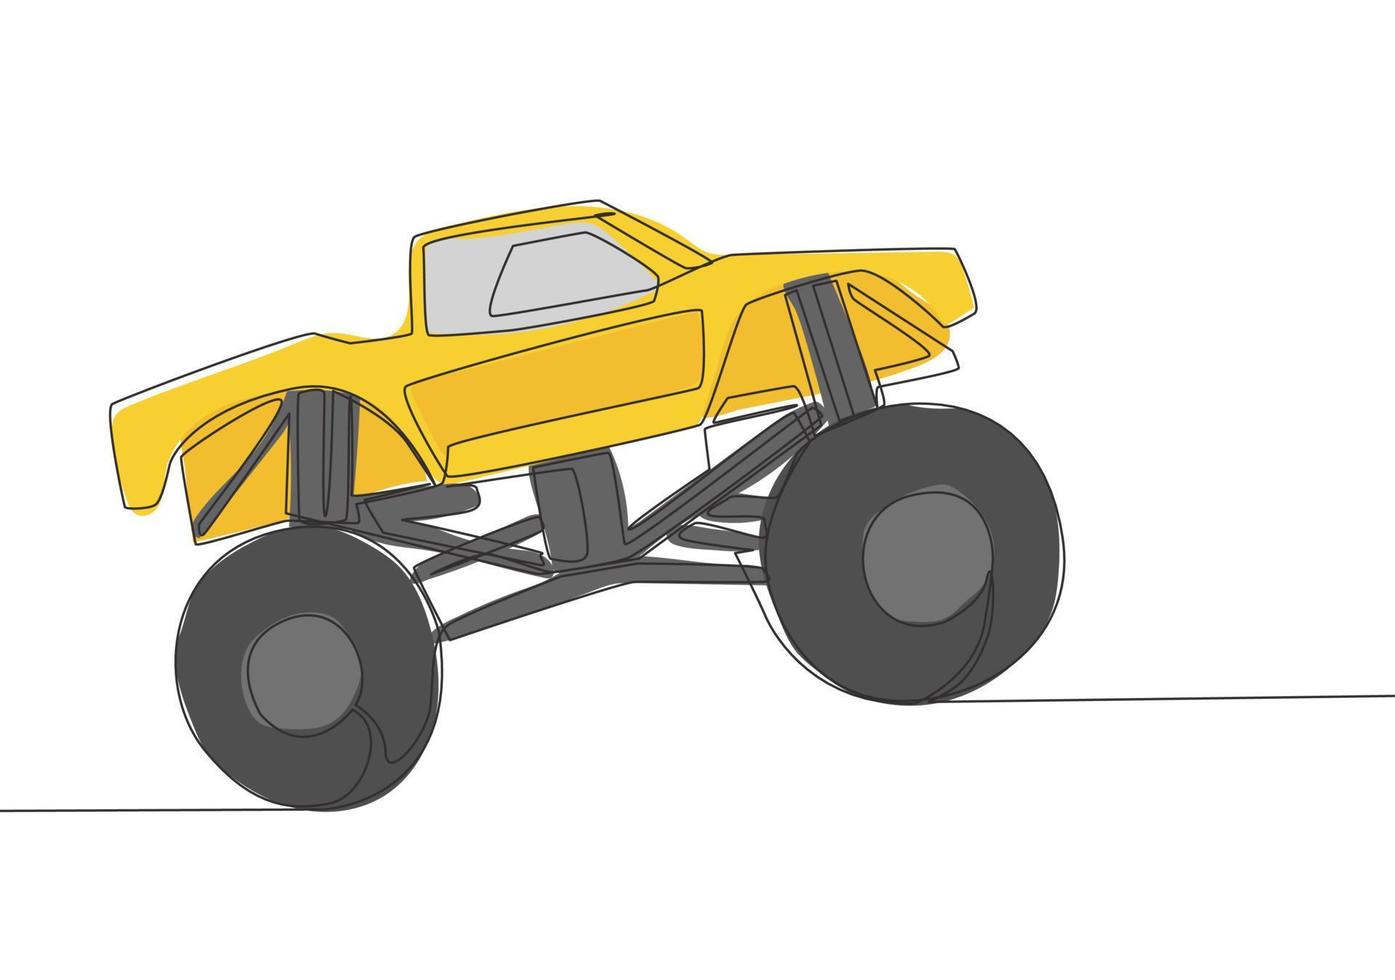 Single line drawing of 4x4 wheel steering monster truck car for competition and tournament. Adventure offroad vehicle transportation concept. One continuous line draw design vector